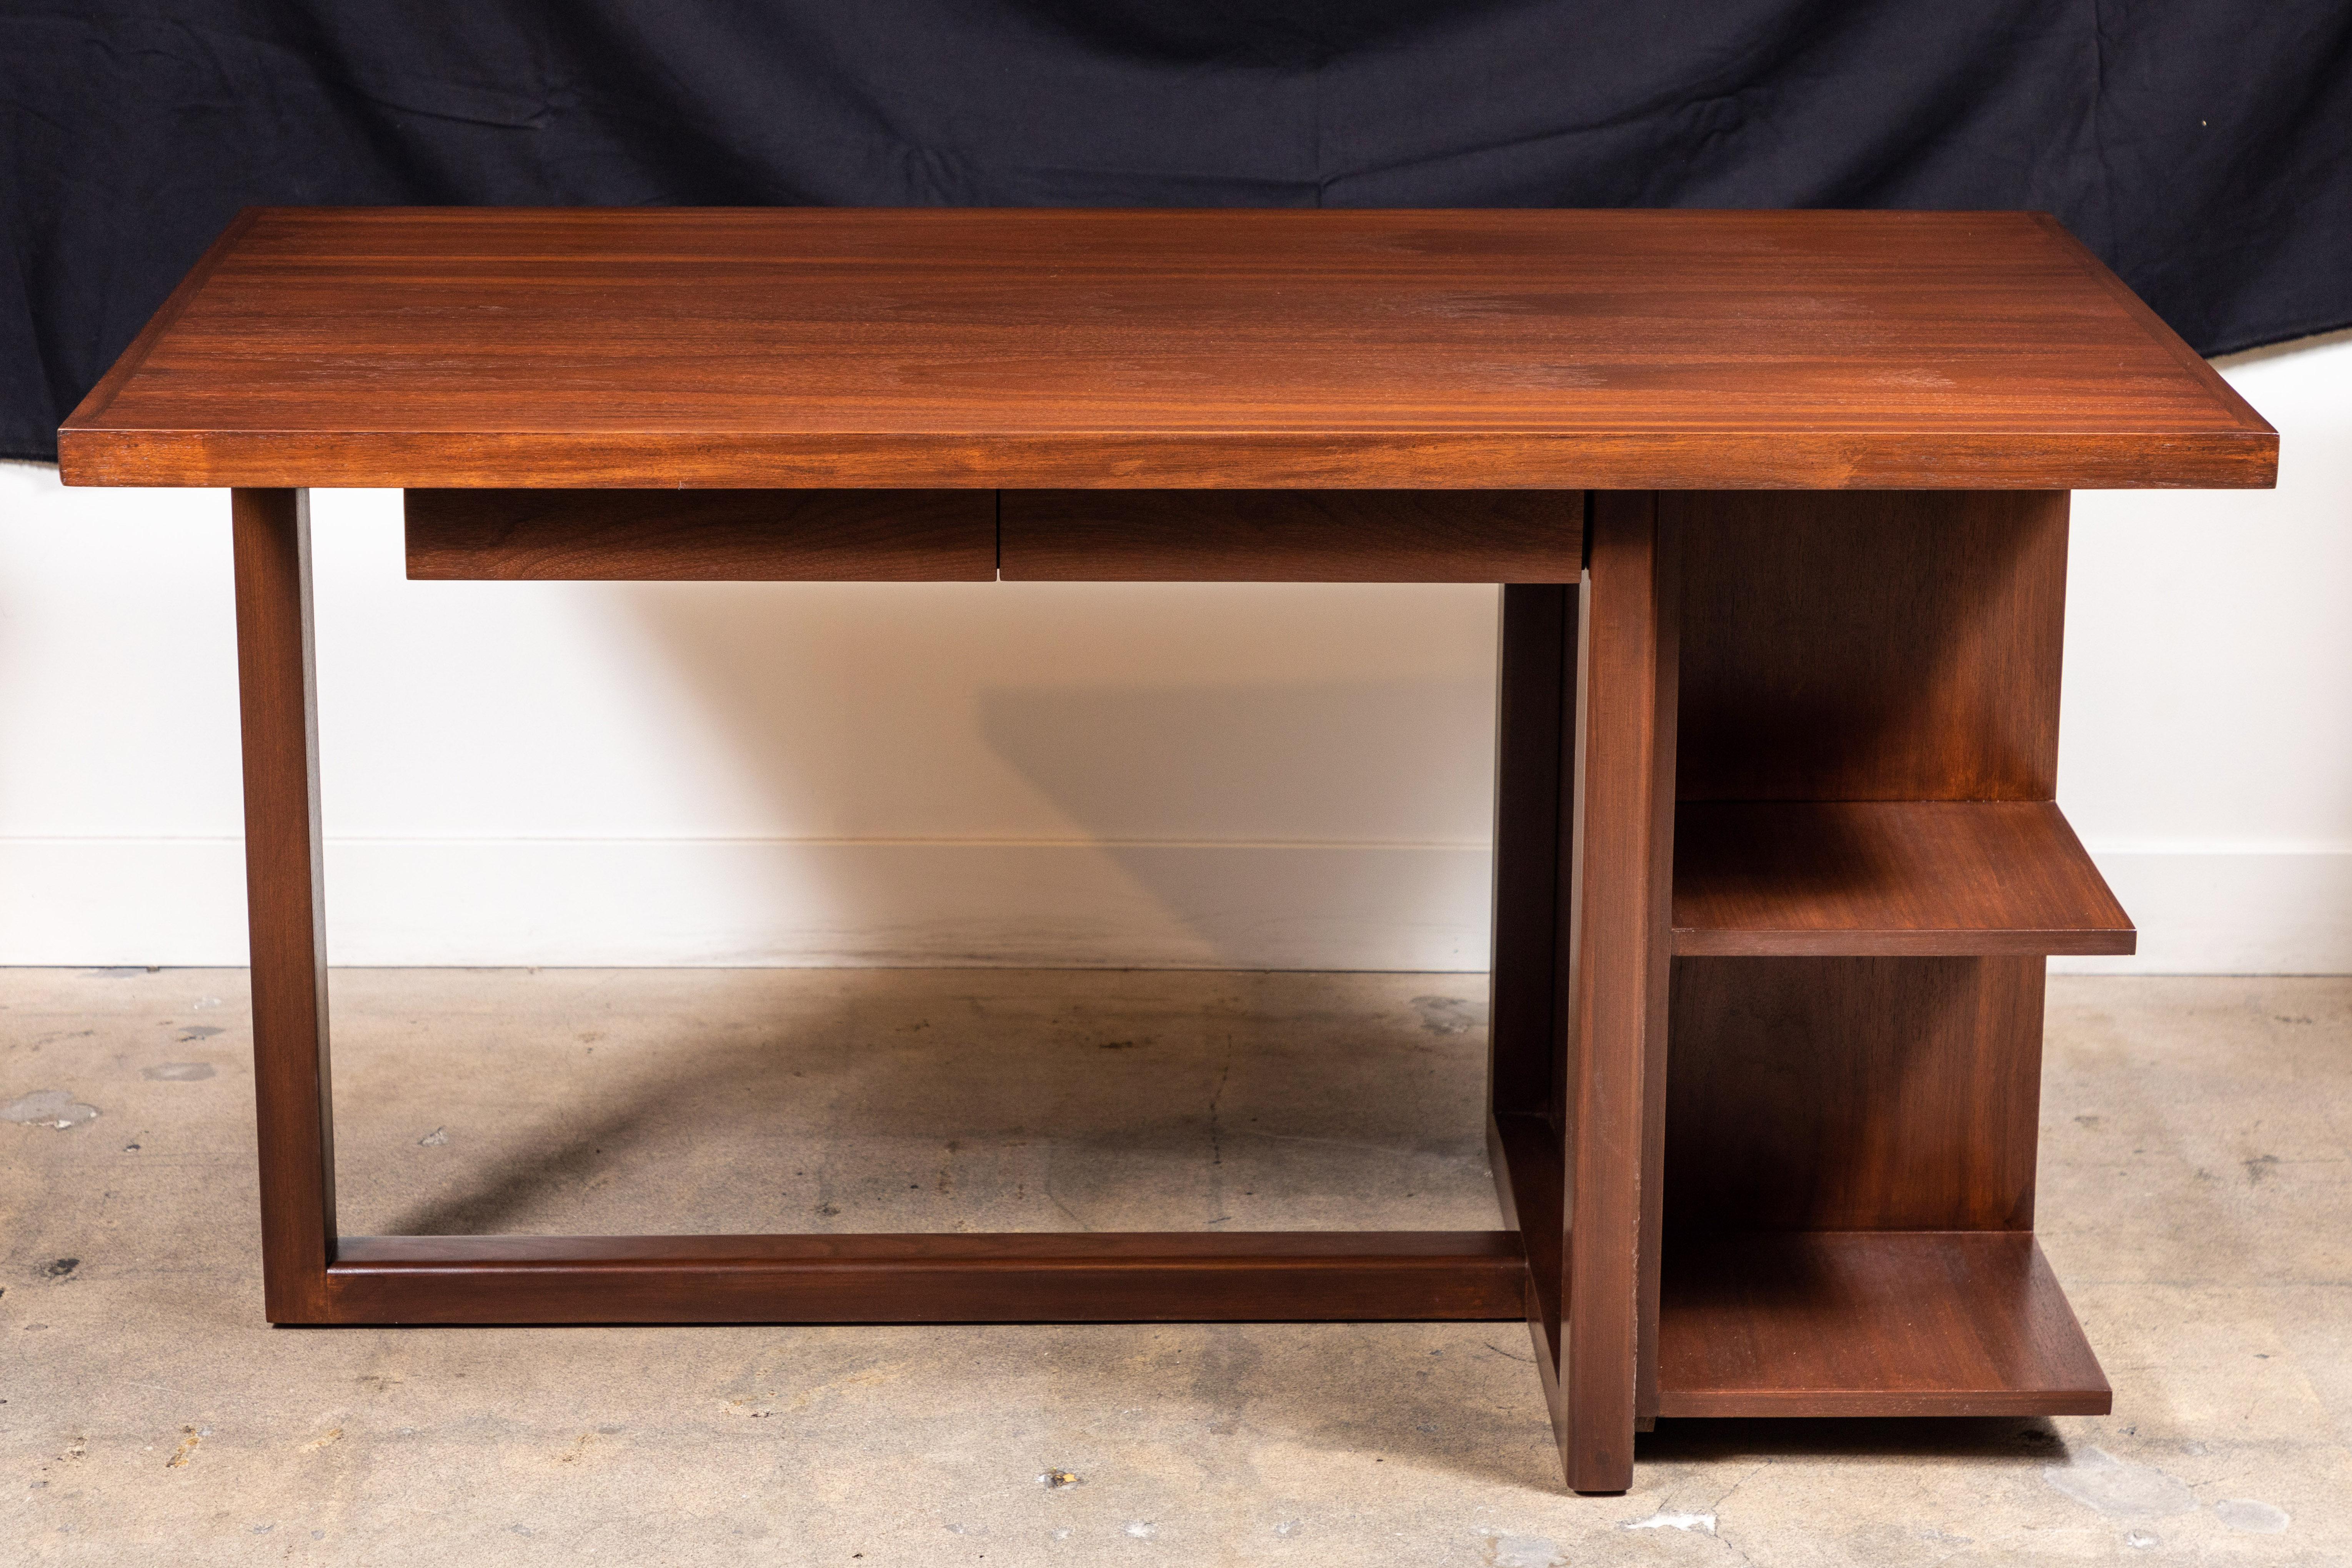 Contemporary Walnut Ivanhoe Desk with Pencil Drawers by Lawson-Fenning